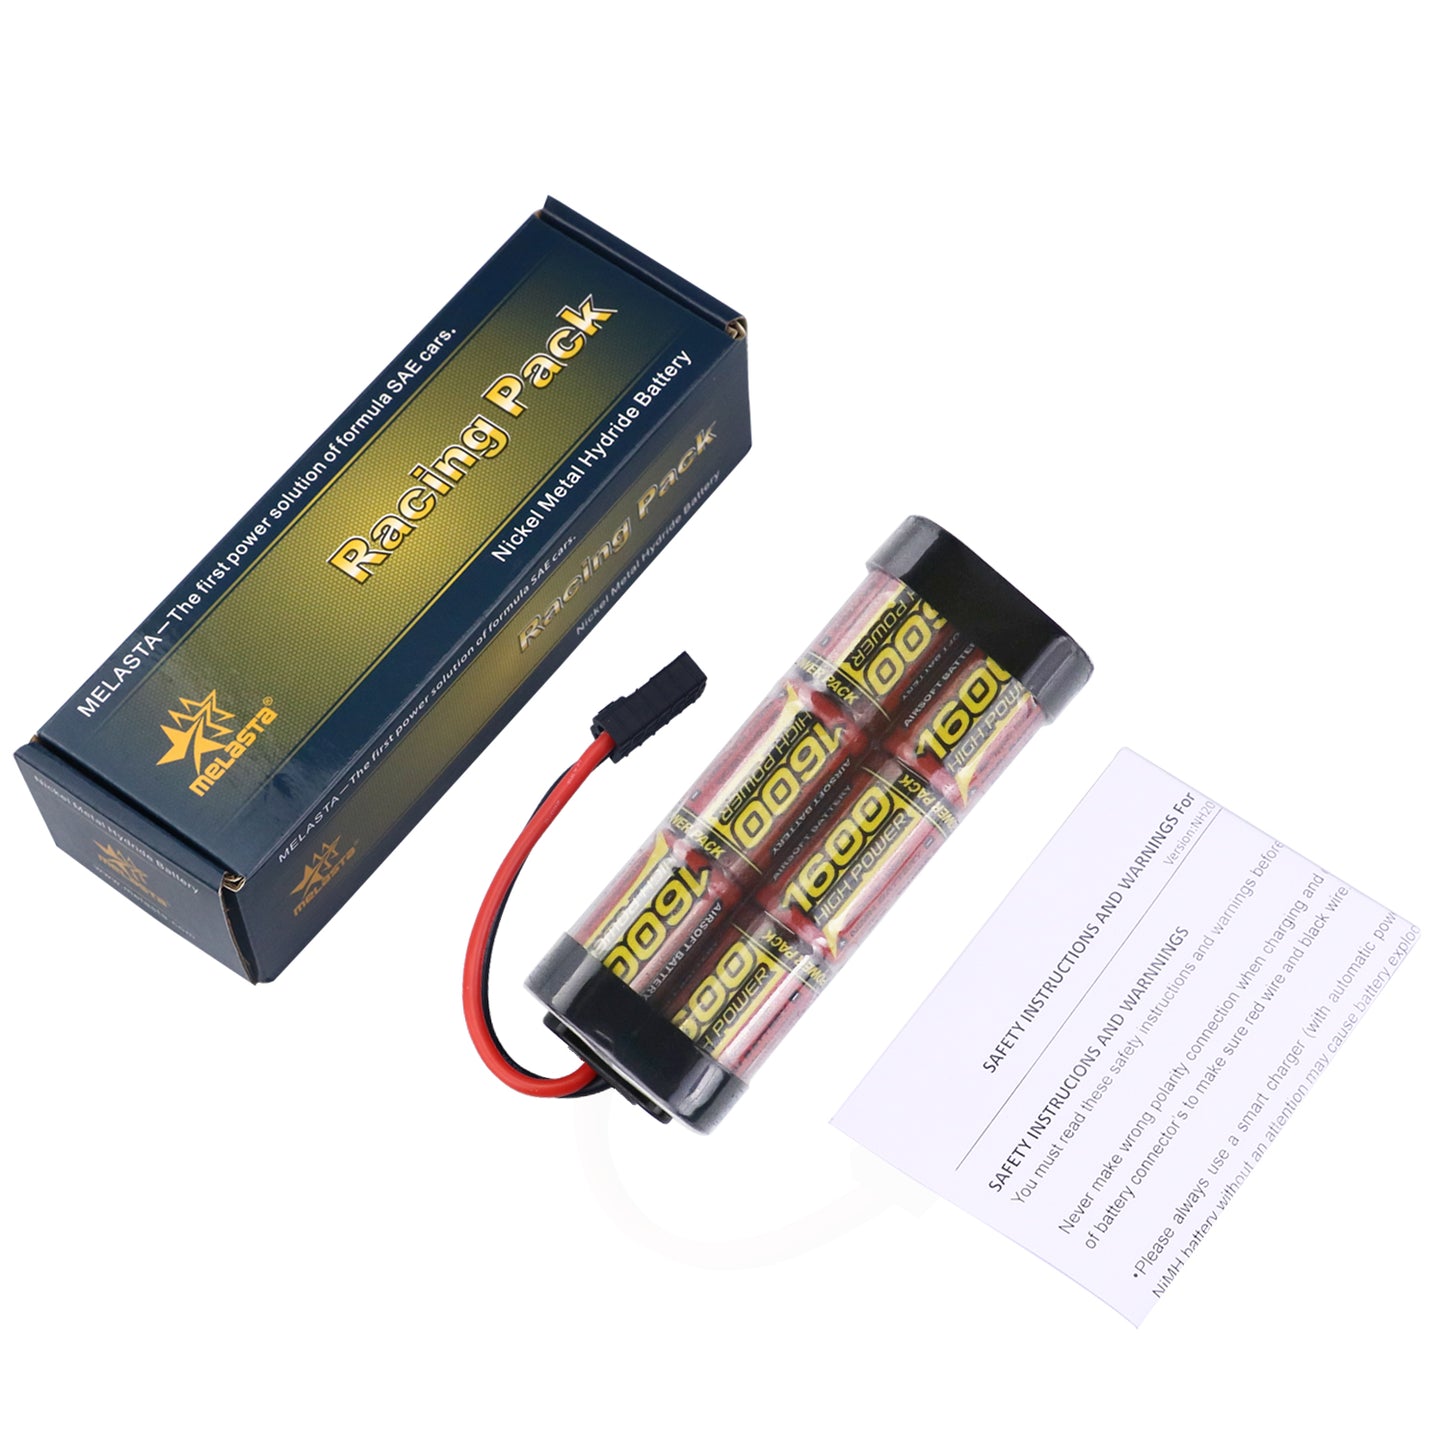 2/3A 7.2V 1600mAh 6S NIMH Battery with Traxxas Connector for traxxas 1/16 RC cars